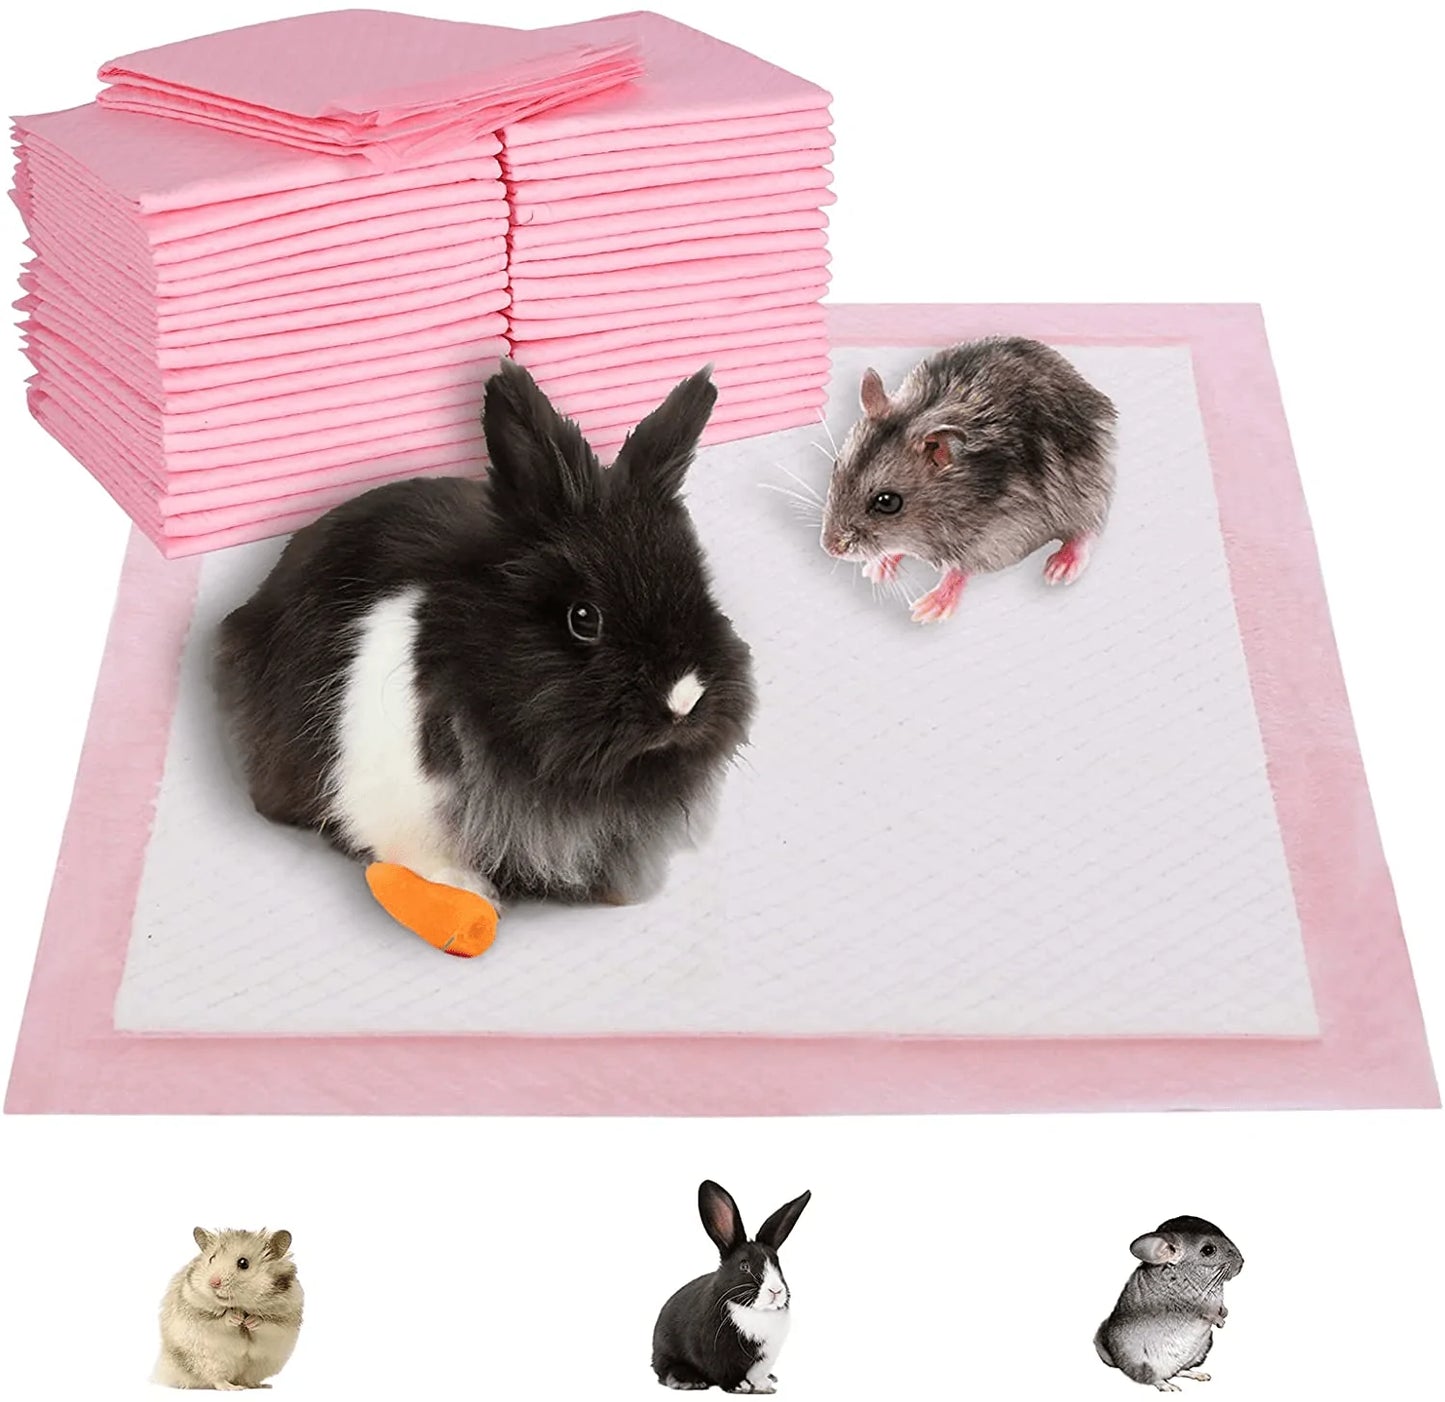 （50/100Pcs）Super Absorbent Rabbit Pee Pads, Disposable Bunny Litter Training Pad Thicken Guinea Pig Cage Liner Small Animal Diaper Pet Cage Accessory for Cat Hamster Reptile Chinchilla Hedgehog  YUNVI 18″ × 13″ × 50pcs  